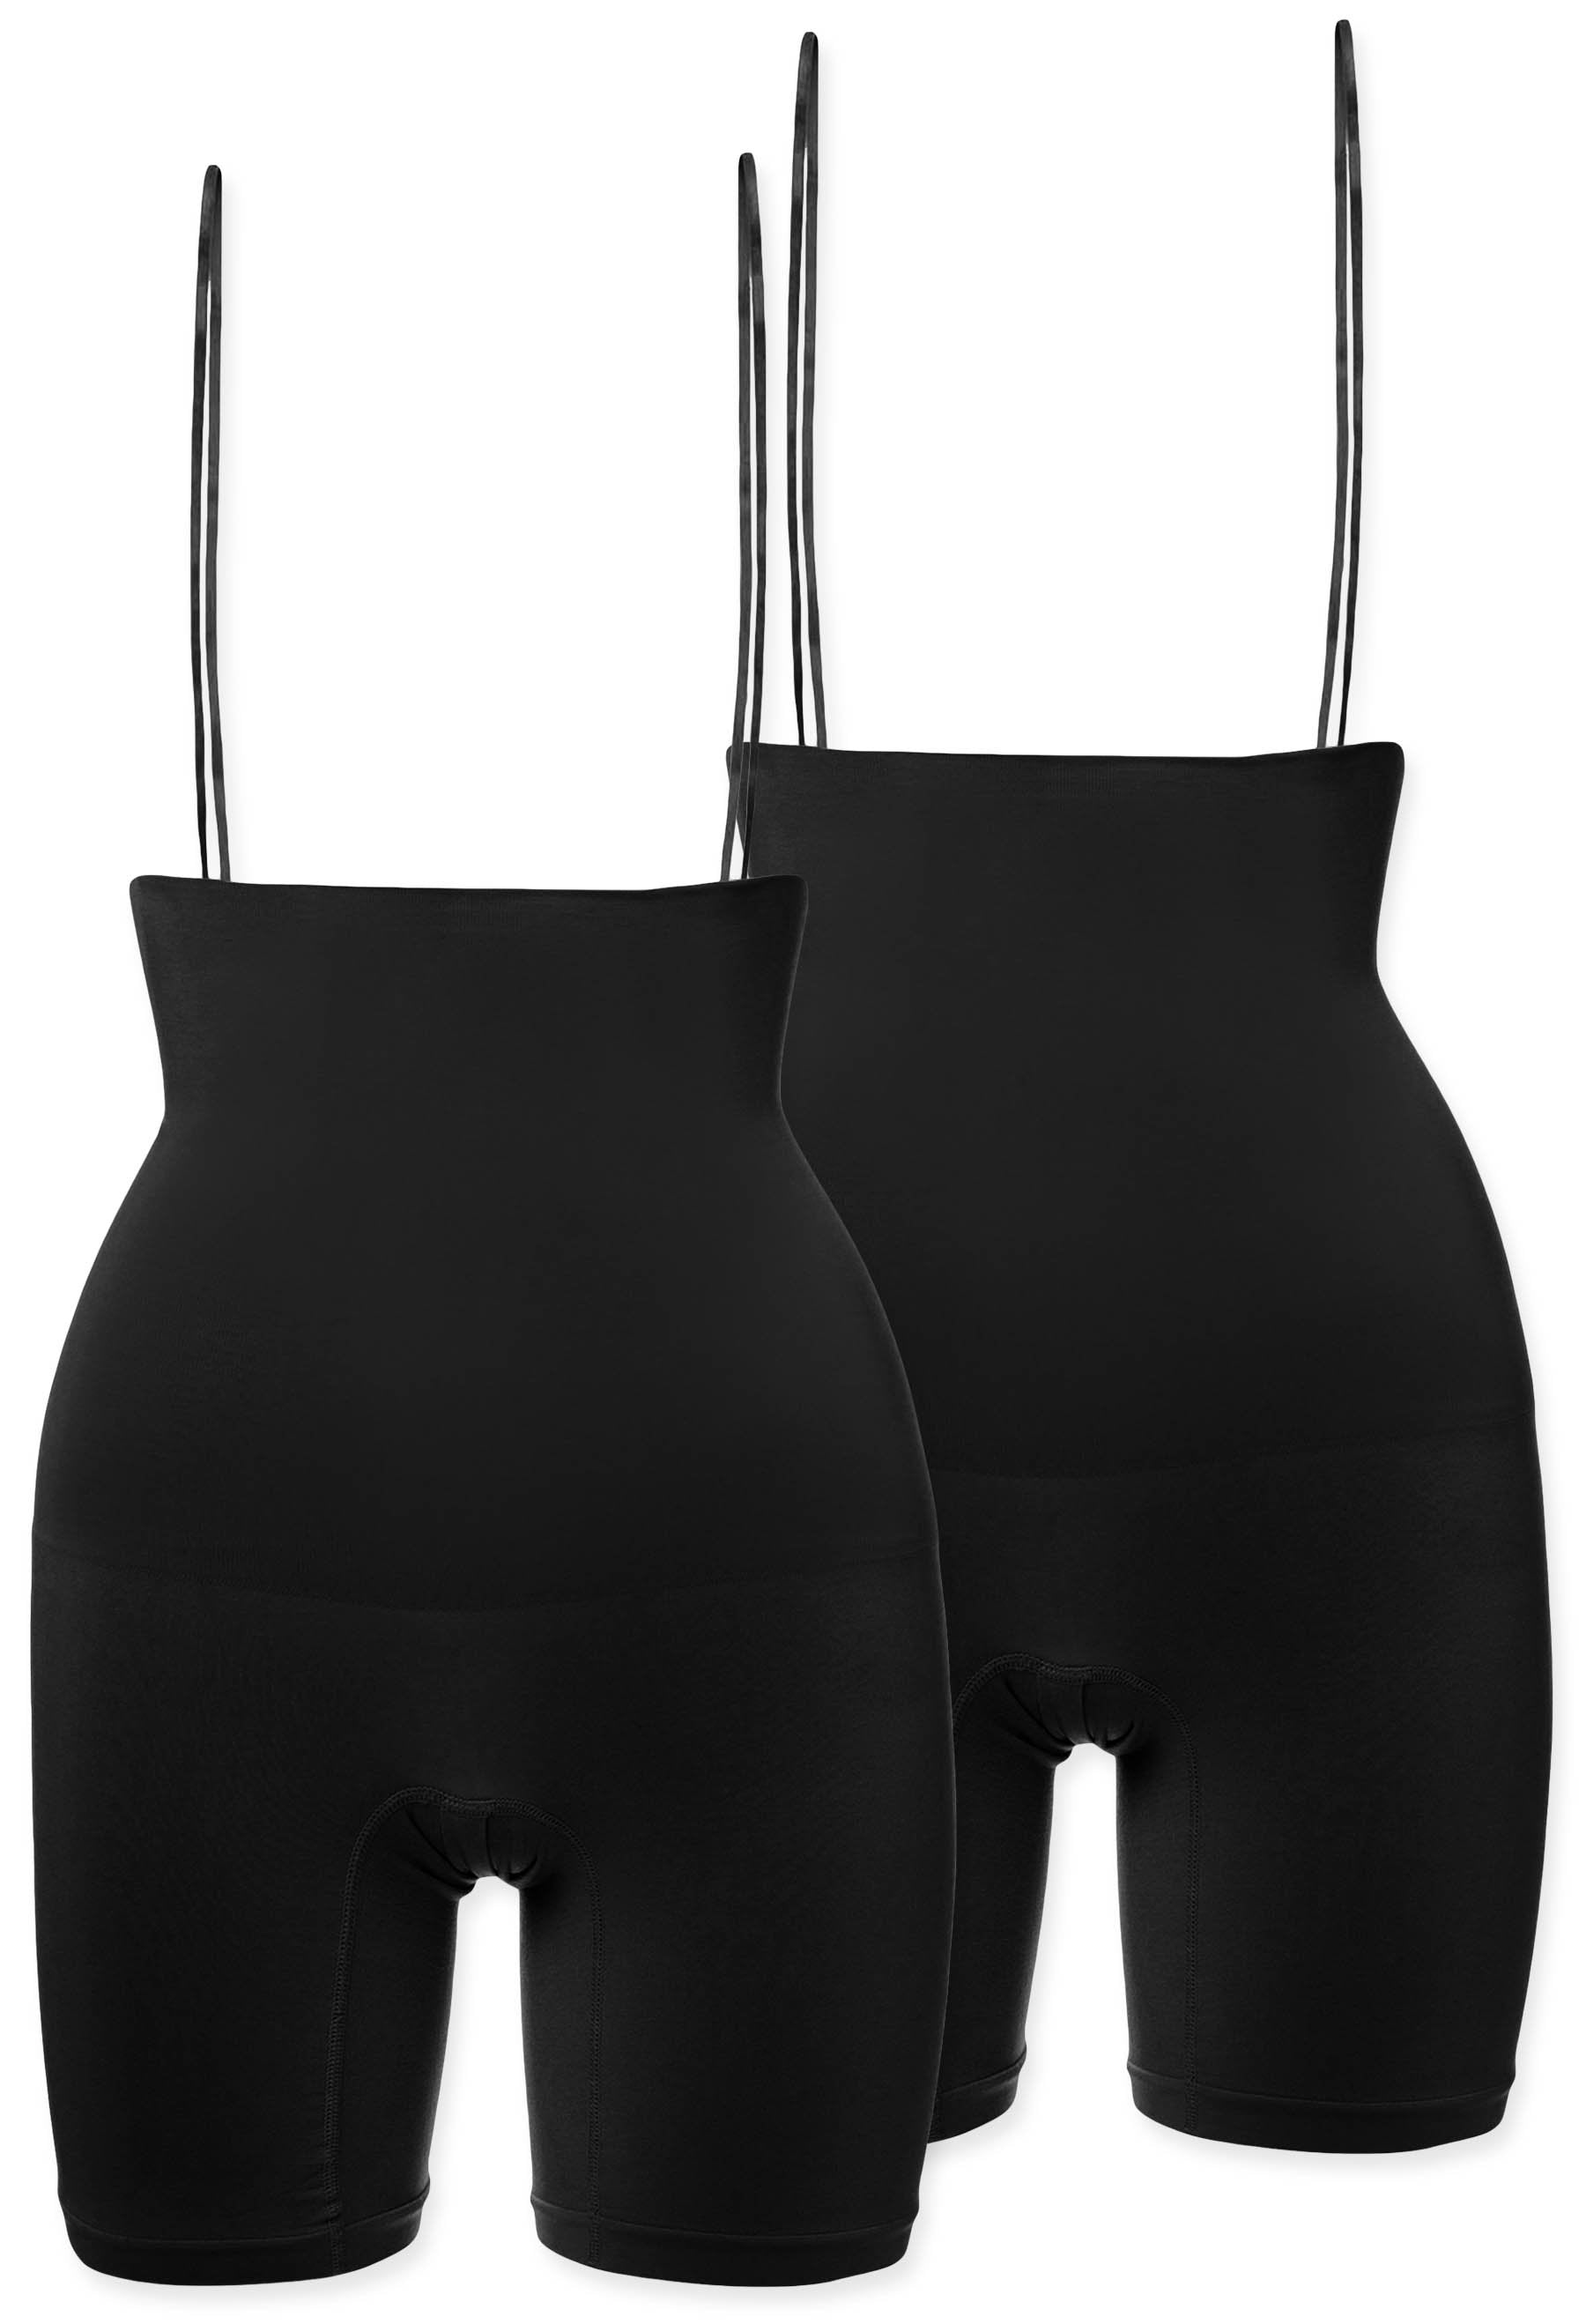 Pieces shaping shorts in black